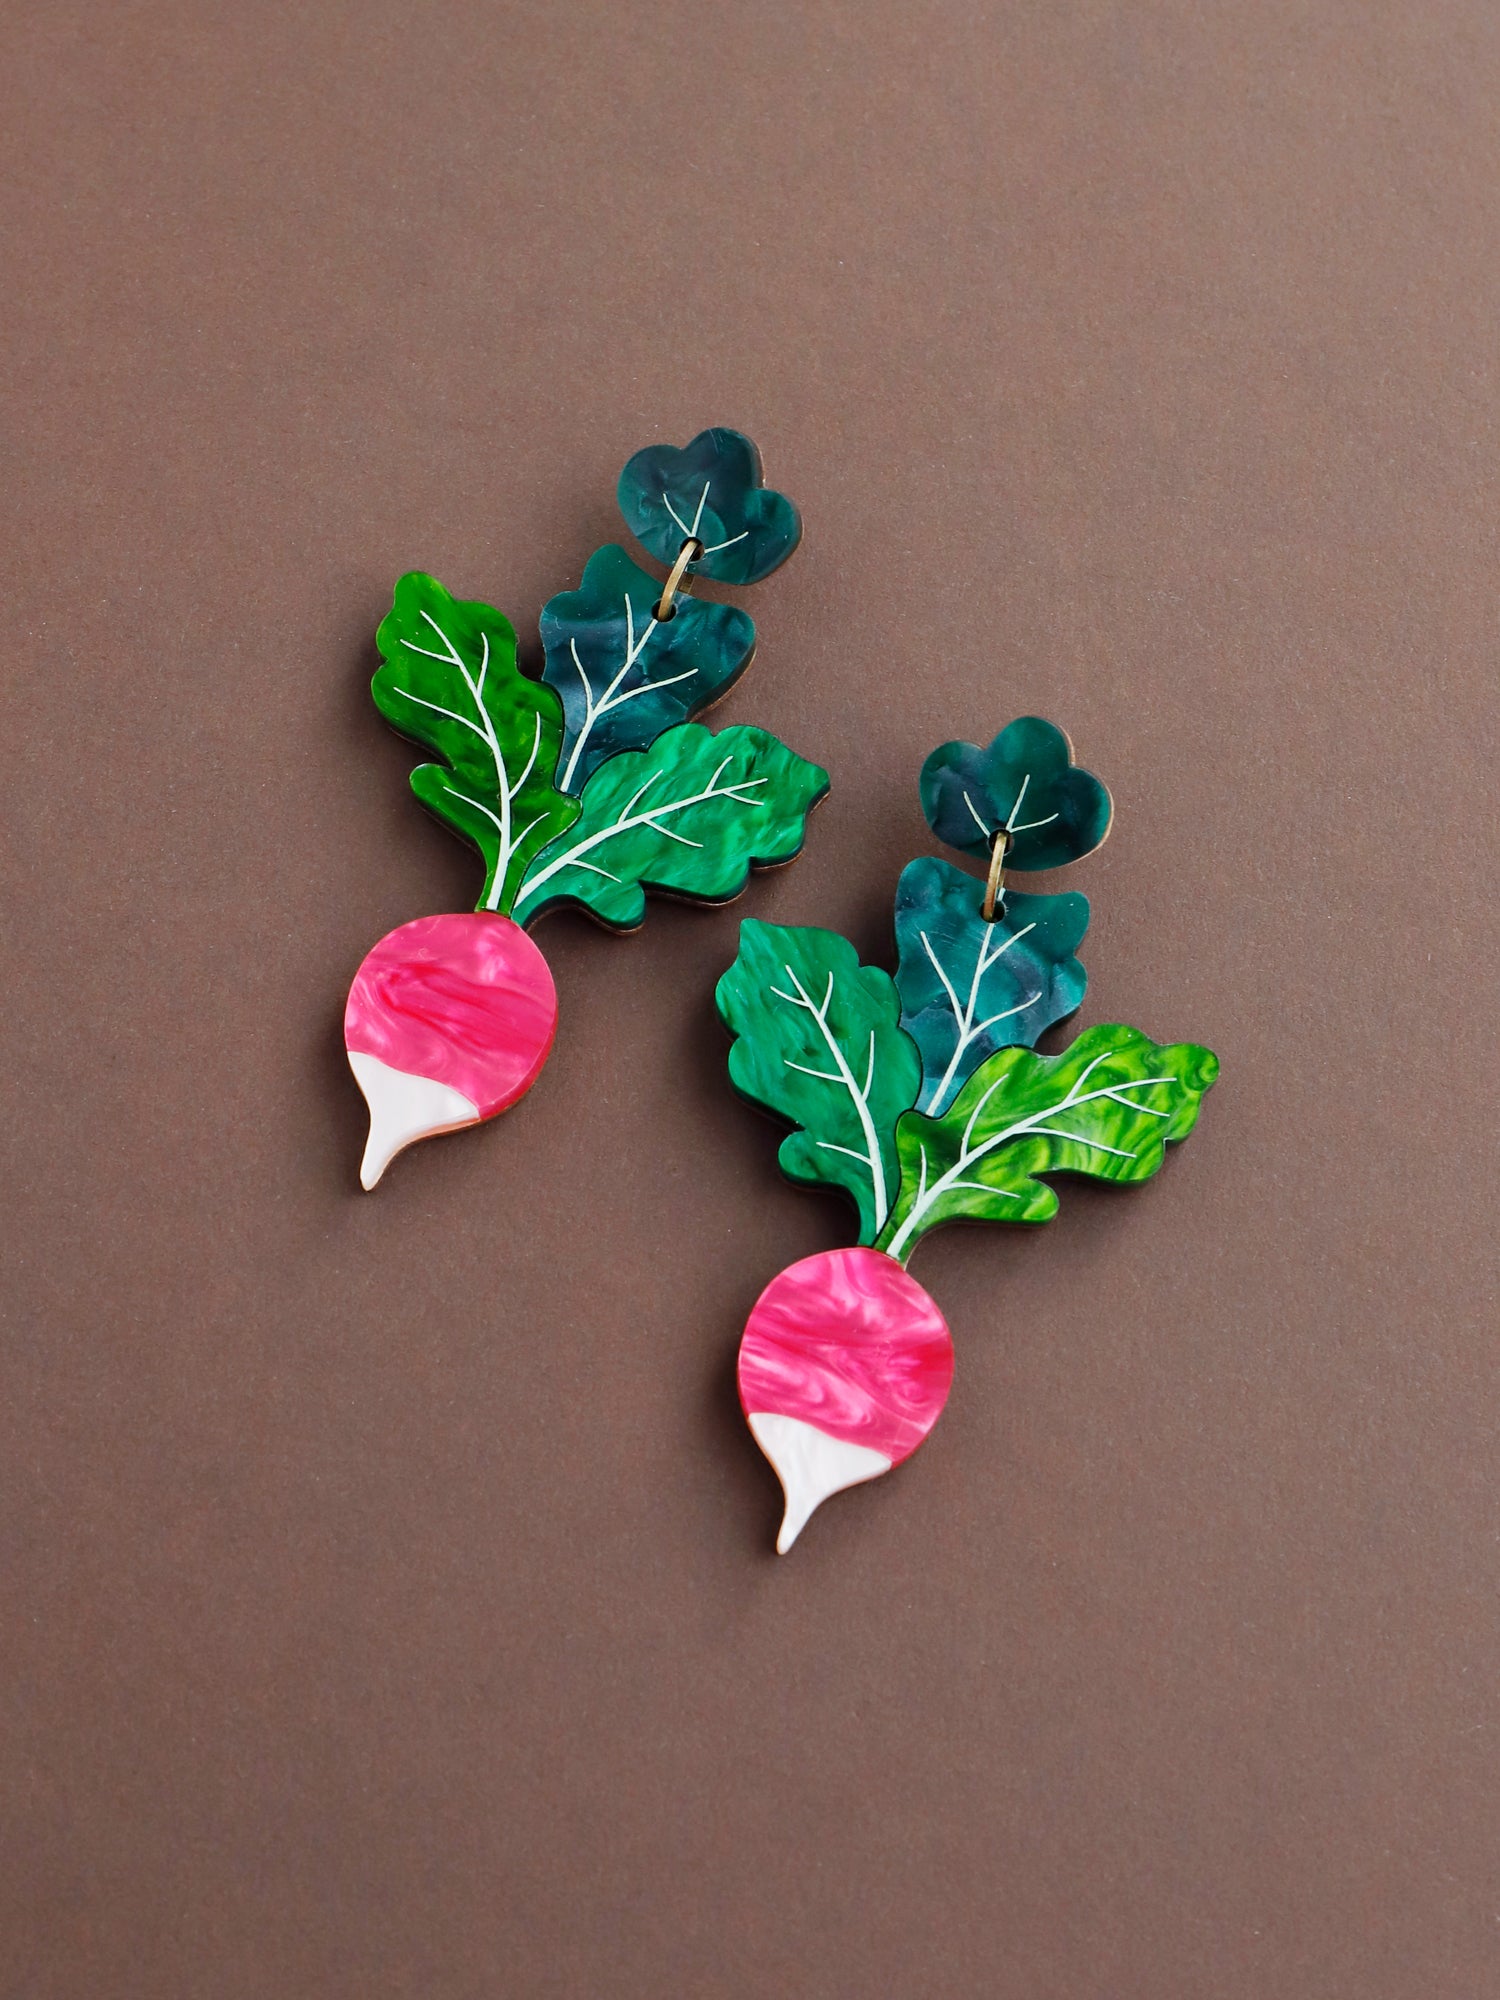 Statement red and green radish acrylic earrings. Handmade in London by Wolf & Moon.